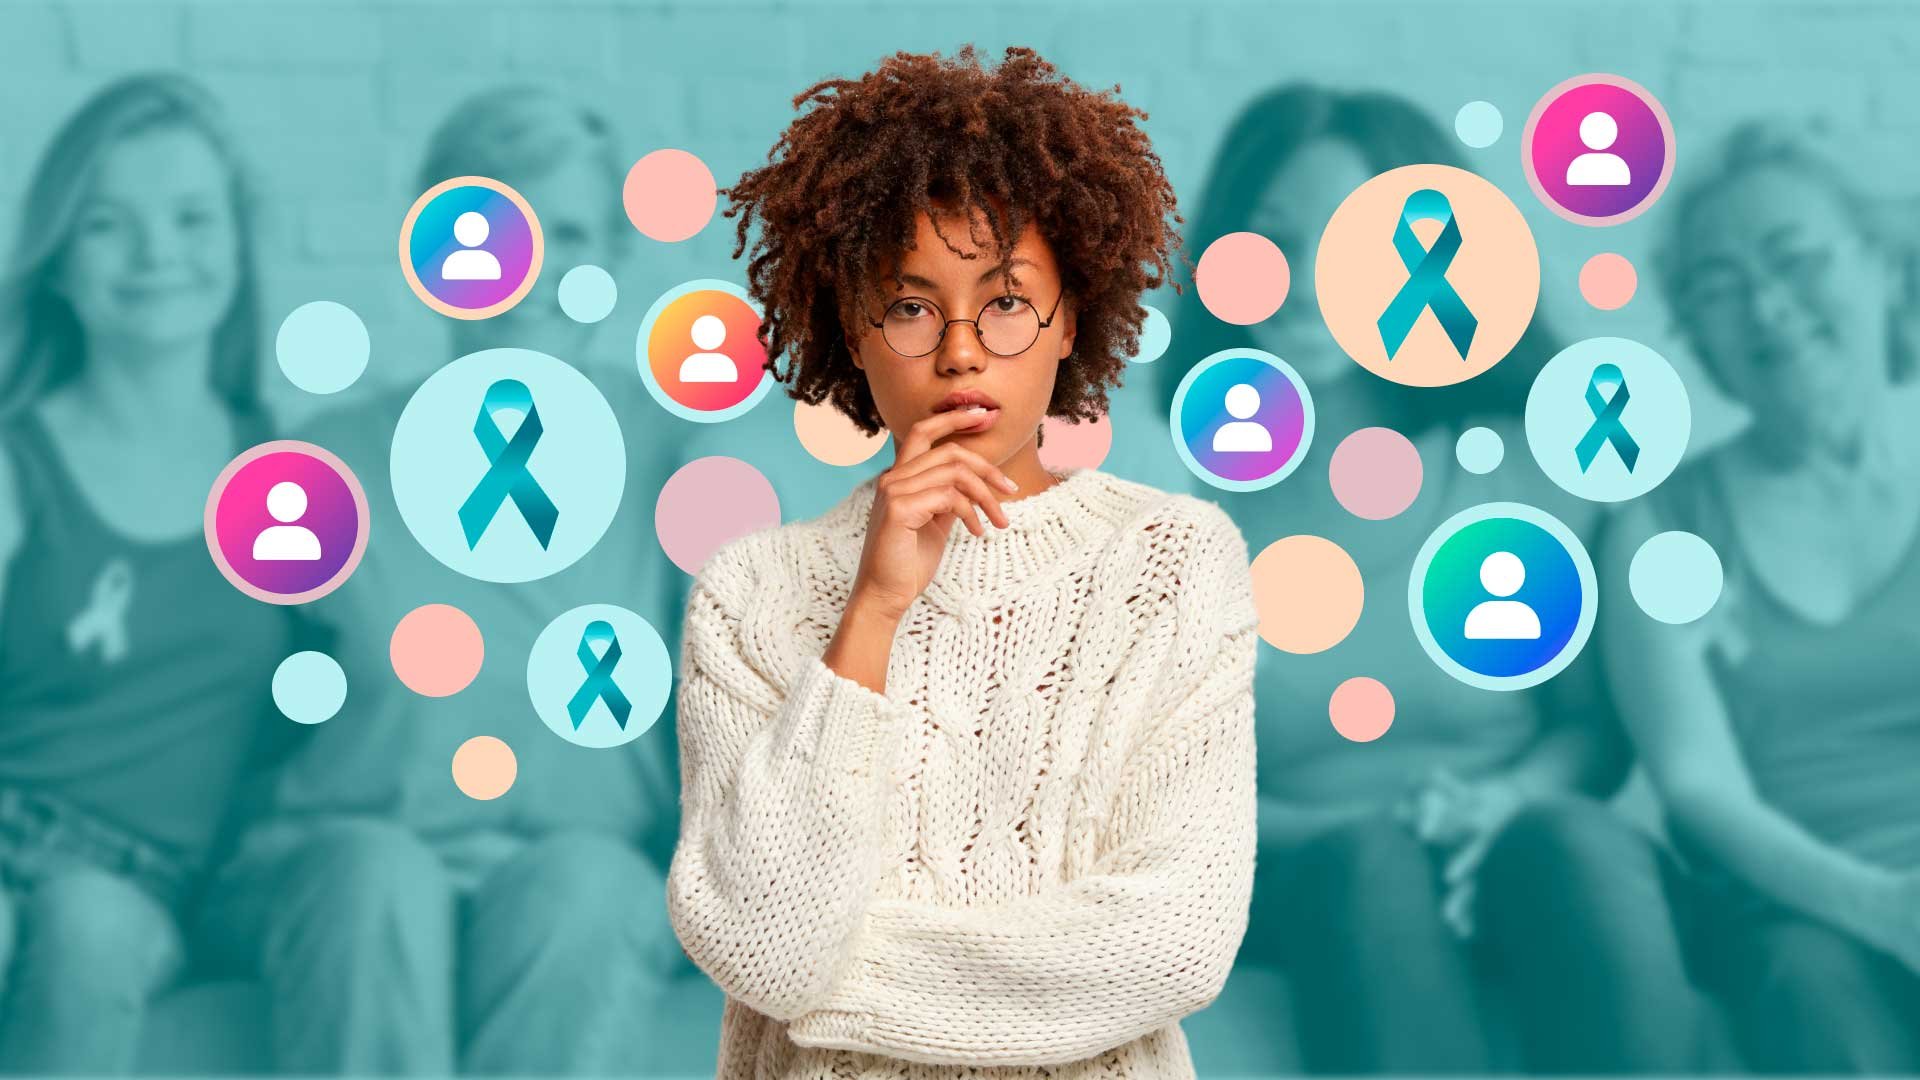 How an ovarian cancer nonprofit used audience targeting to reach 1 in 6 women in the UK